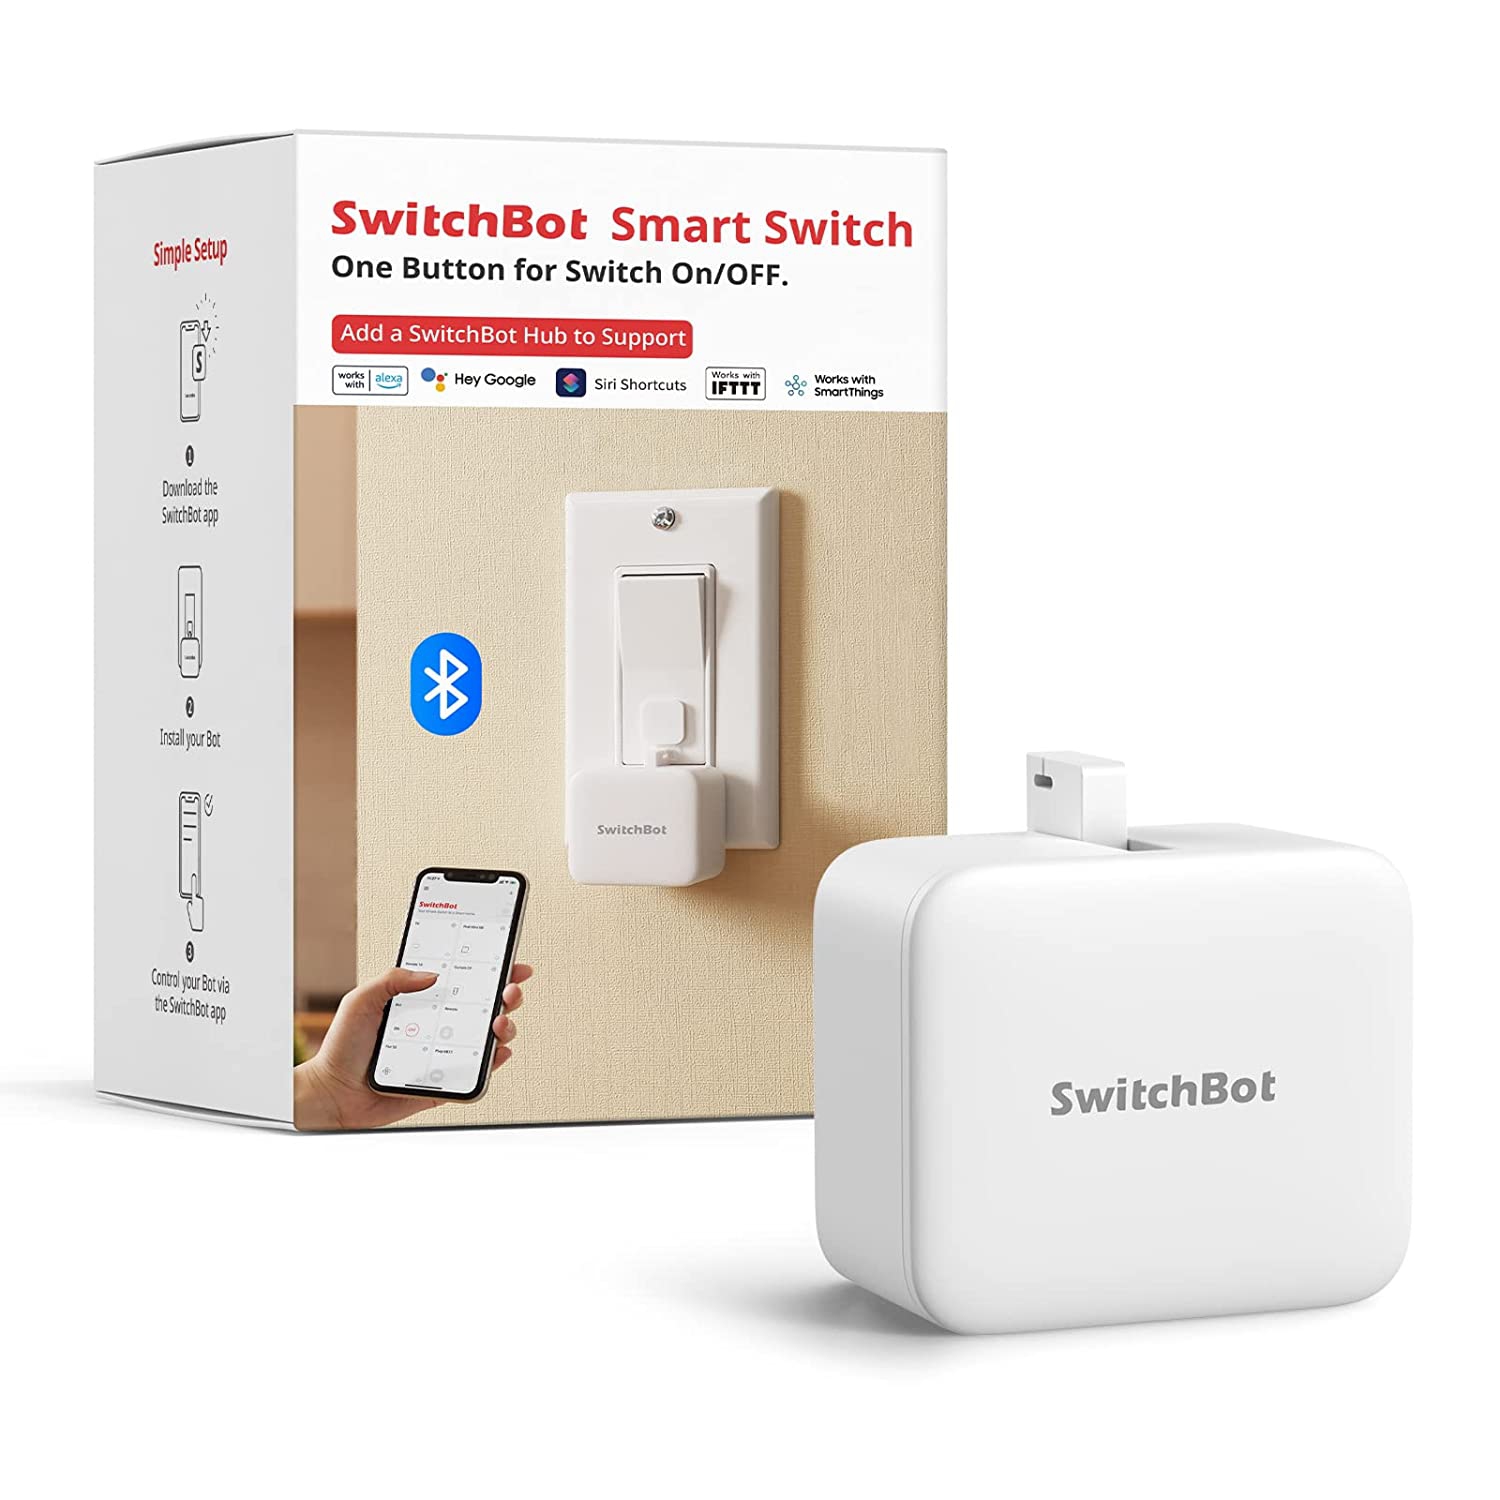 SwitchBot Bot | Smart Switch Button Pusher - No Wiring, Wireless App or Timer Control, Add SwitchBot Hub Mini to Make it Compatible with Alexa, Google Home, IFTTT, White